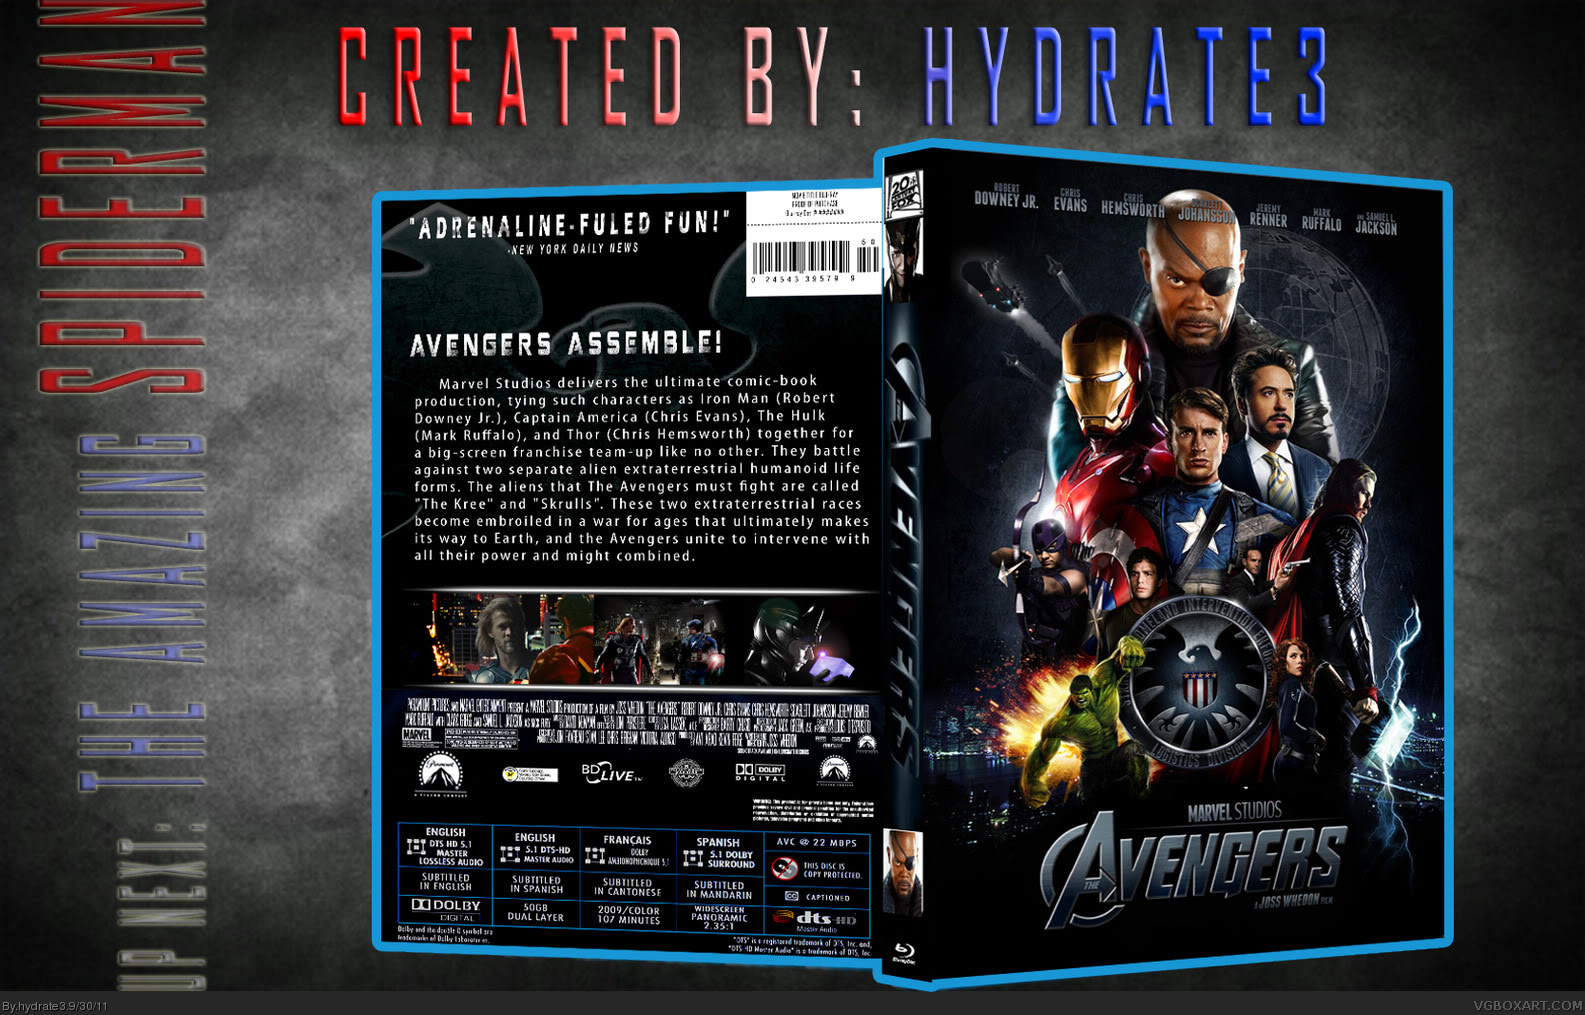 The Avengers box cover